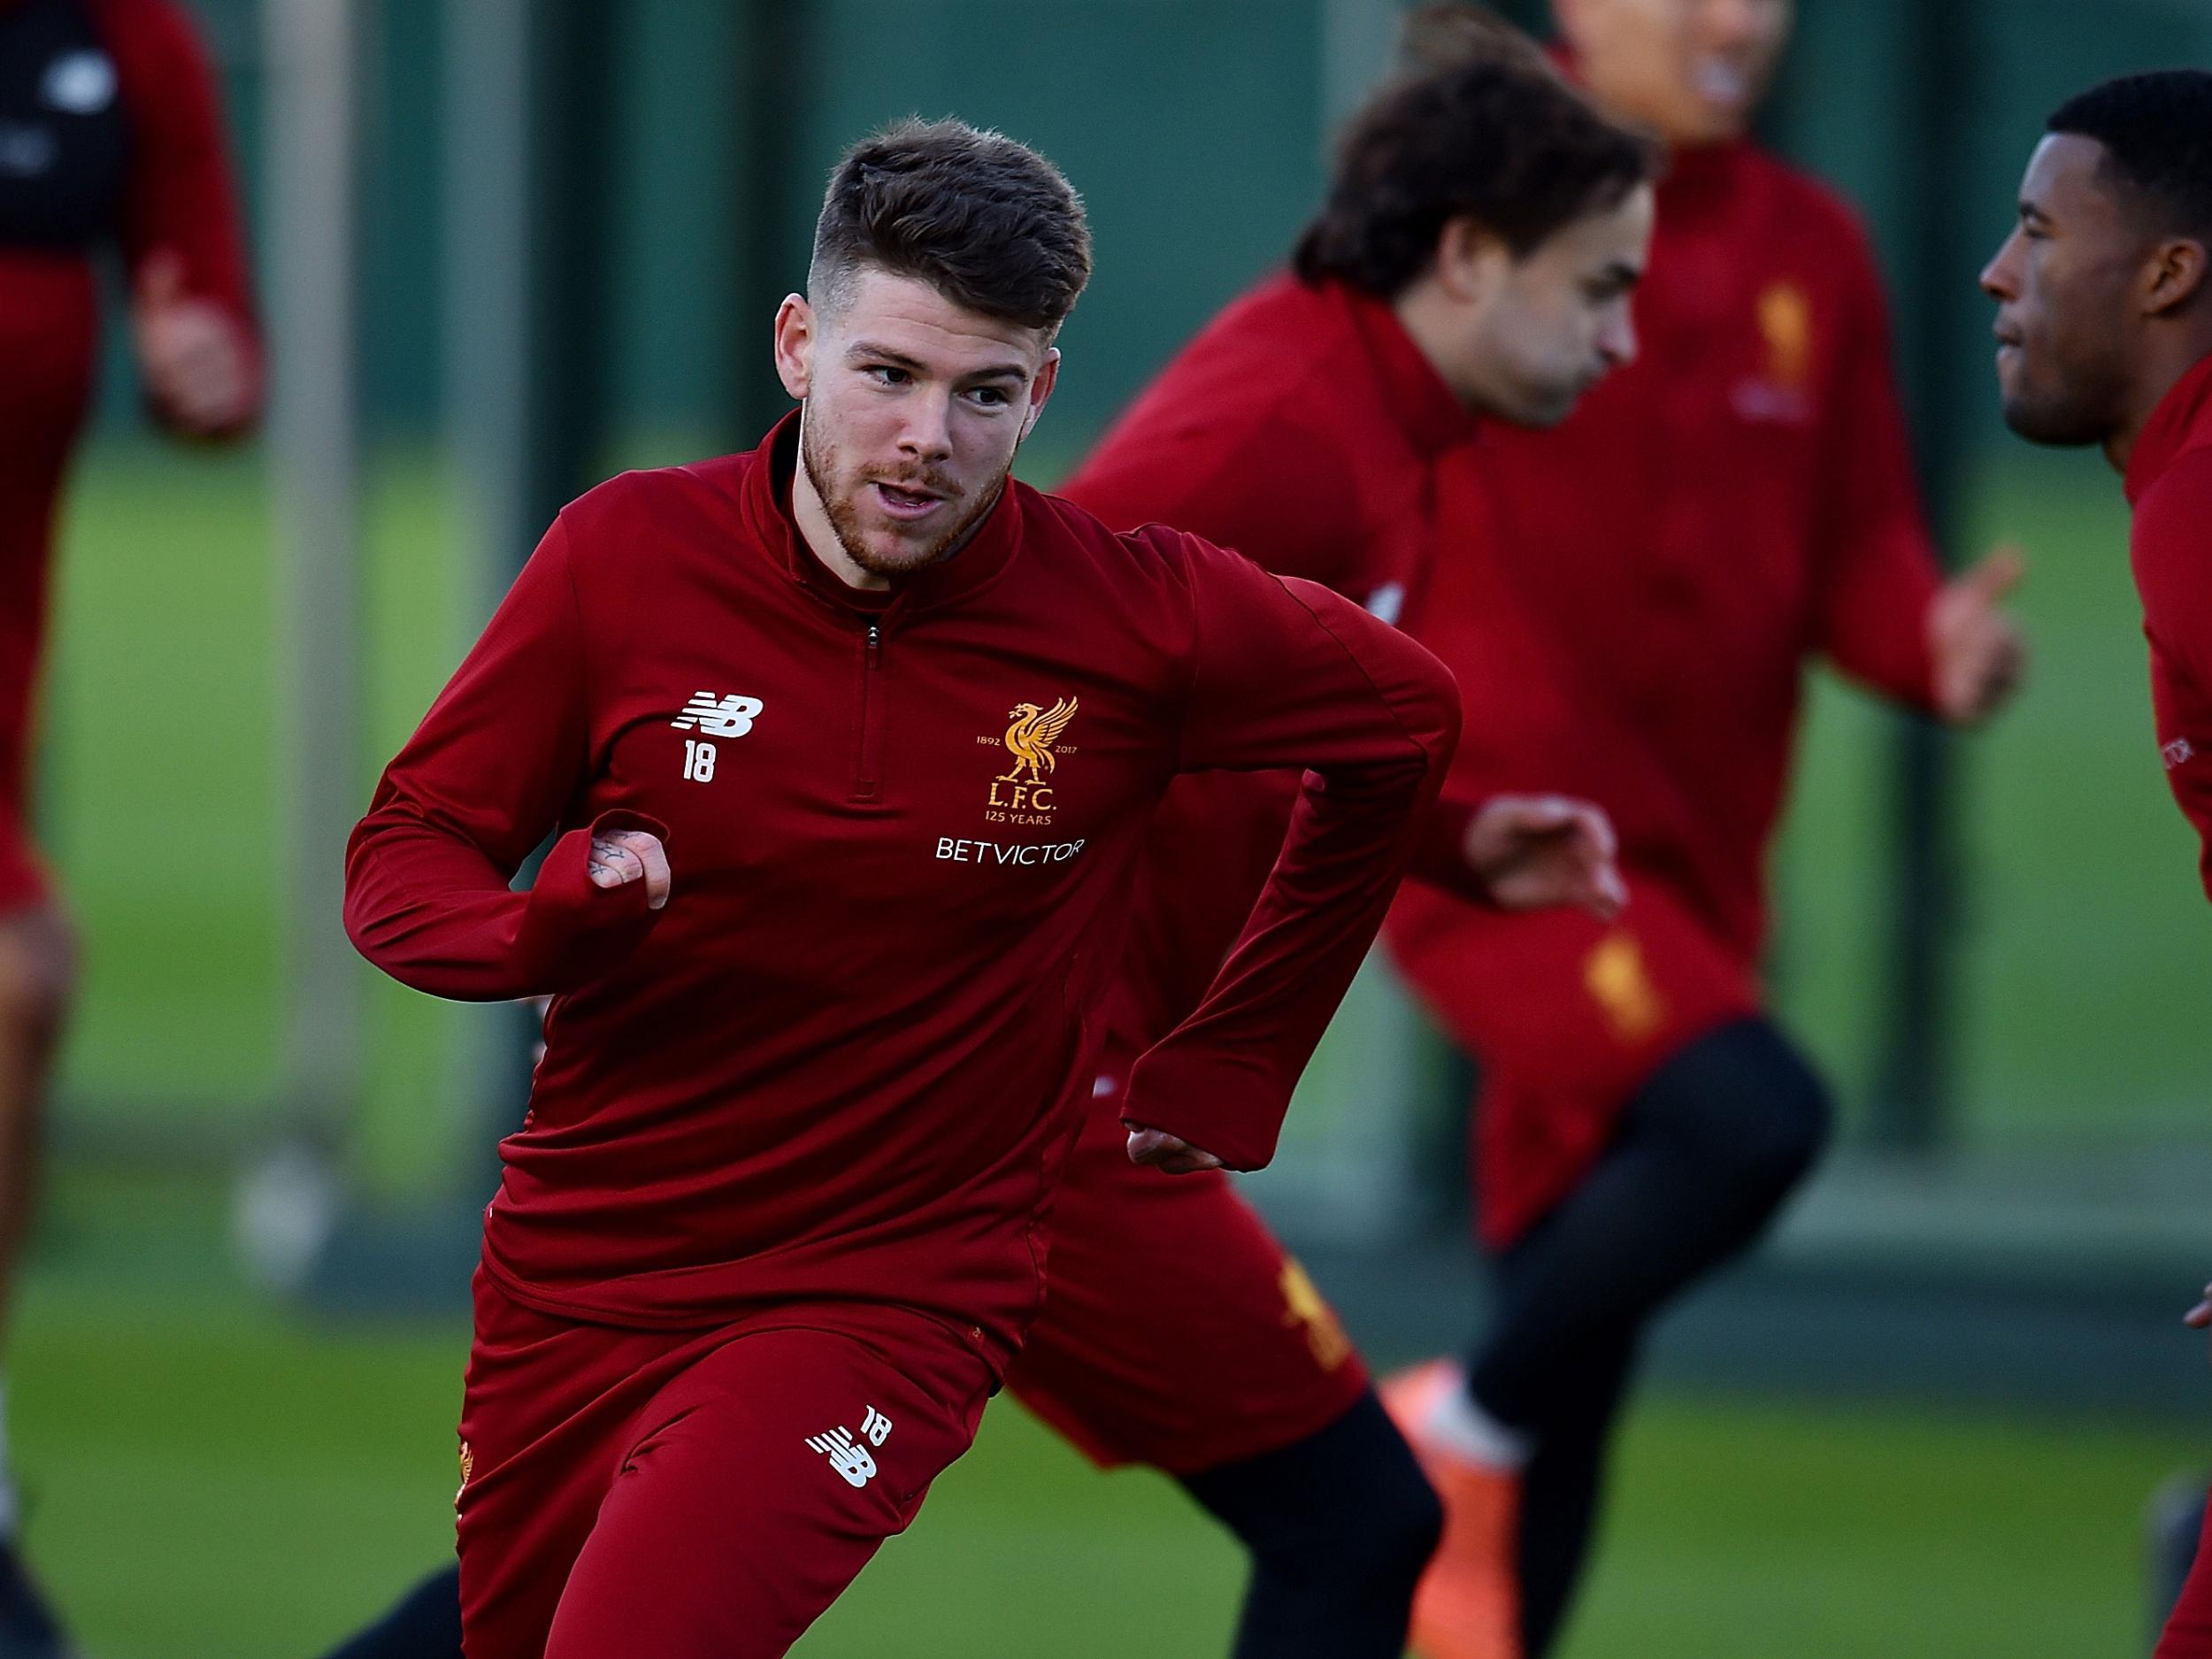 Liverpool full-back Alberto Moreno has come in for criticism since his display in Seville